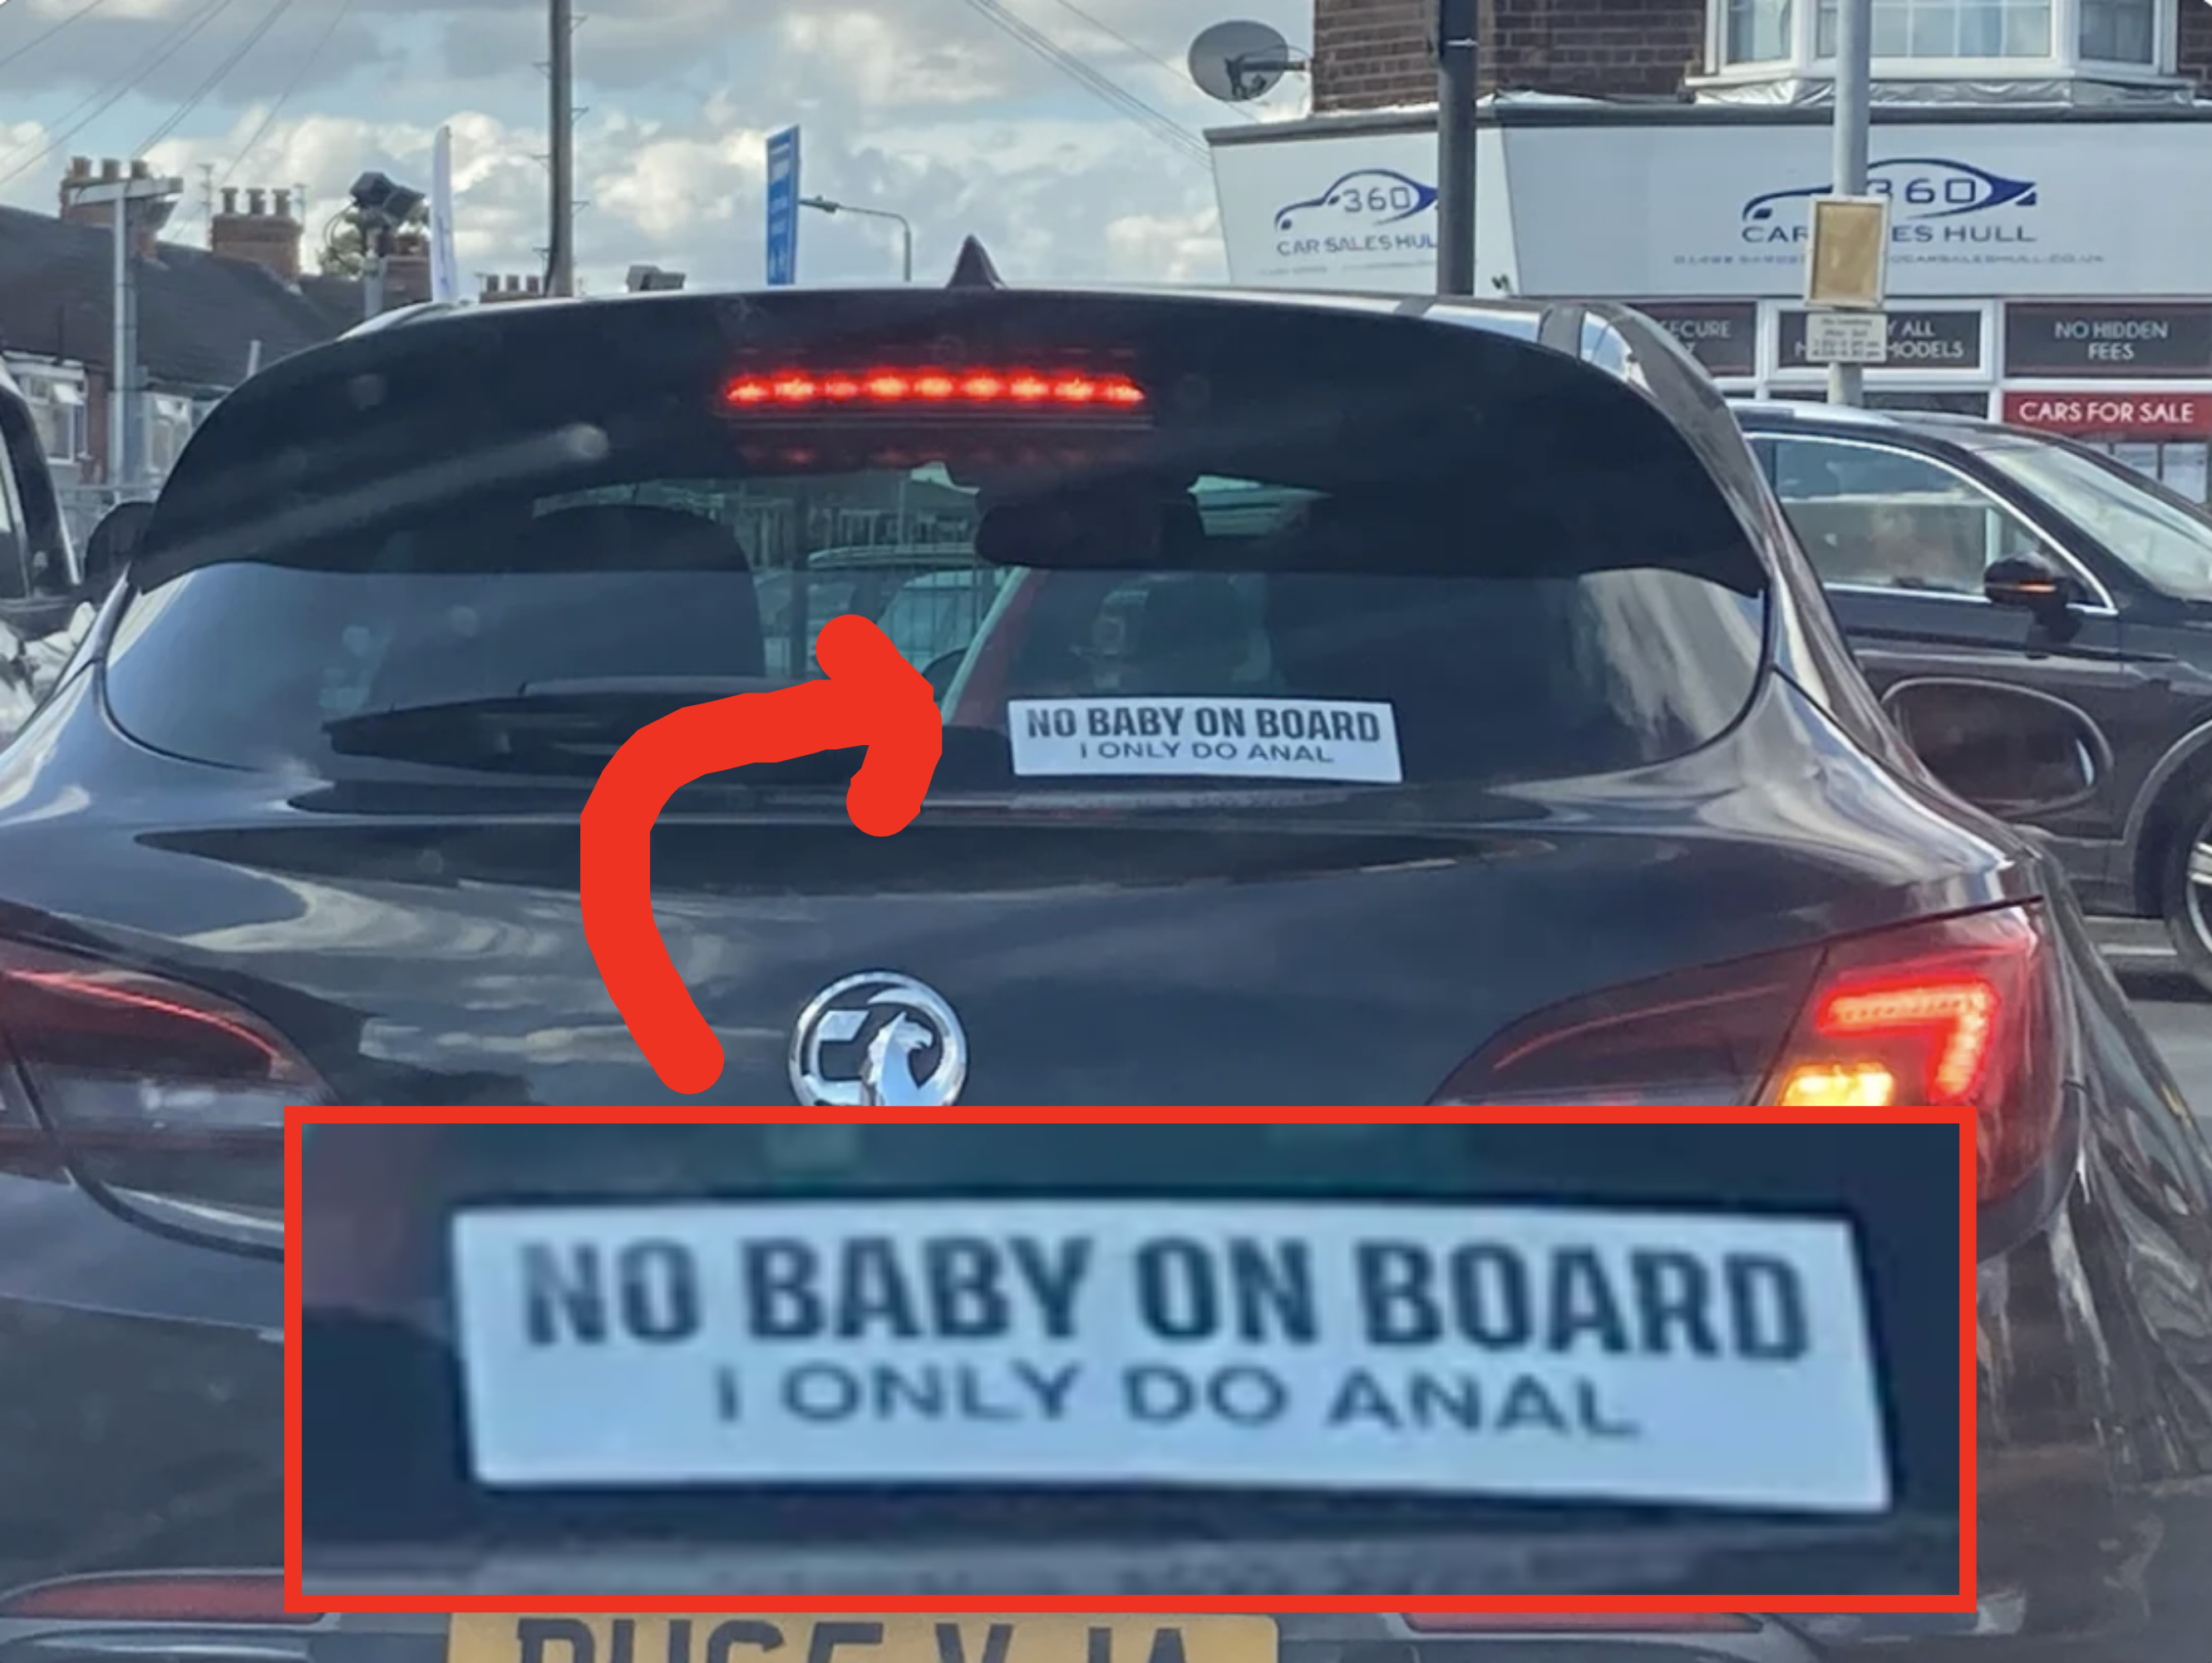 &quot;No baby on board. I only do anal&quot;